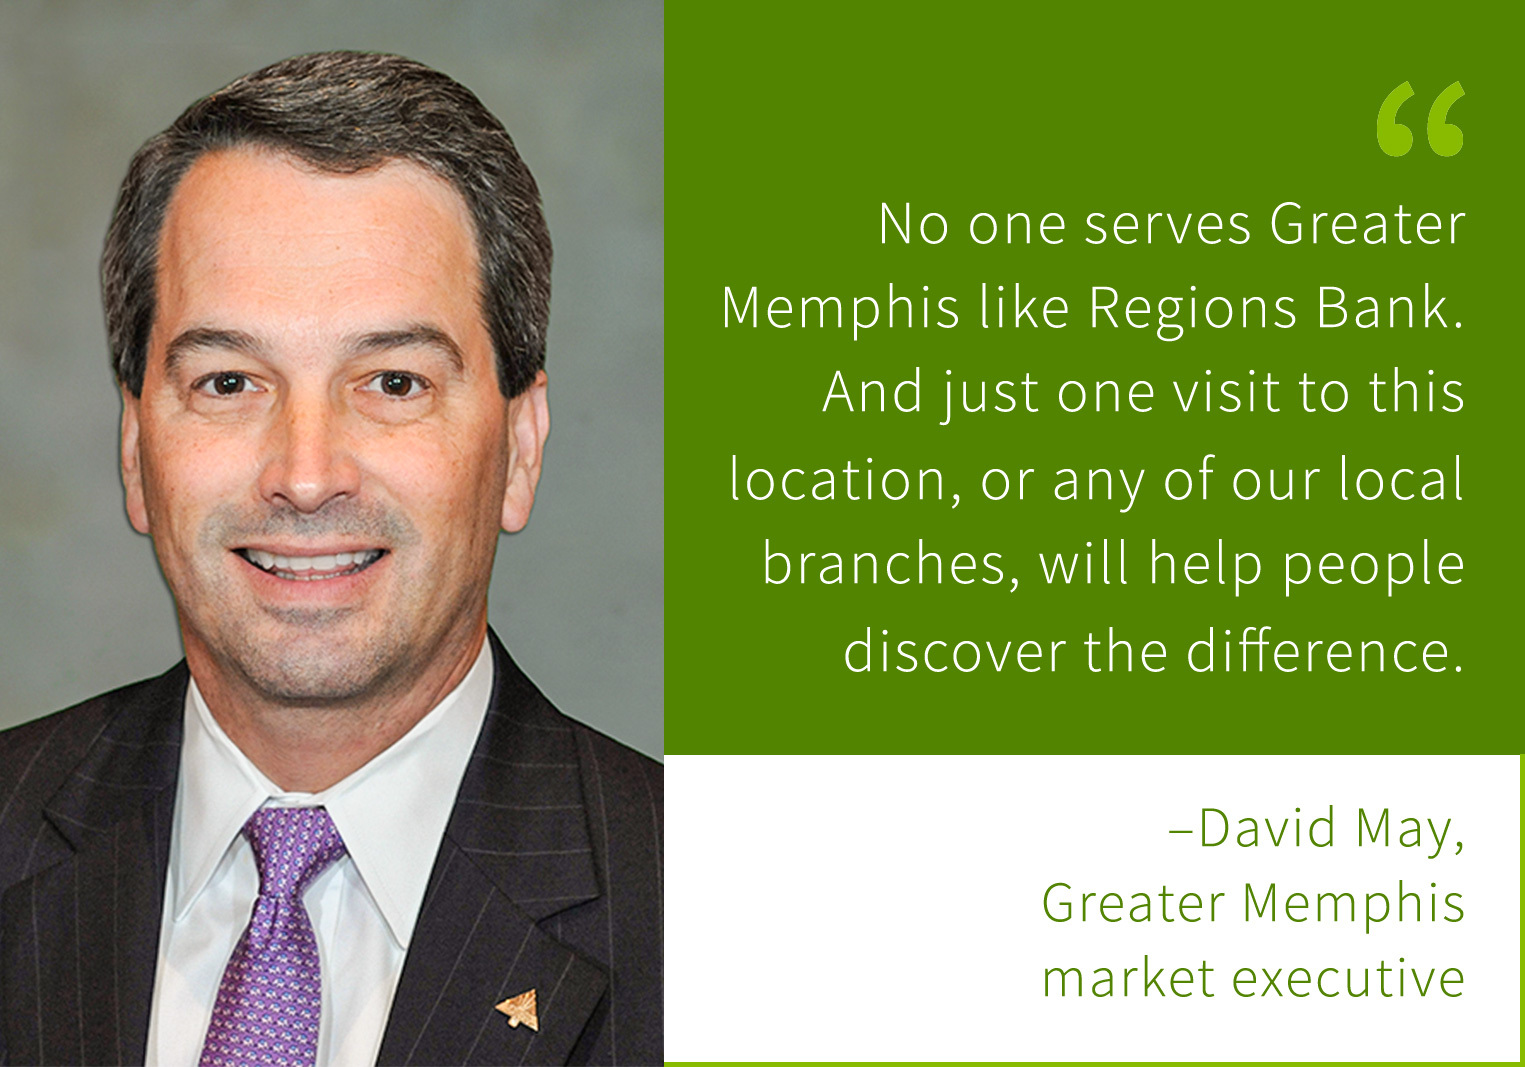 Photo of David may with Quote that says, "No one serves Greater Memphis like Regions Bank. And just one visit to this location, or any of our local branches, will help people discover the difference." David May, Greater Memphis market executive